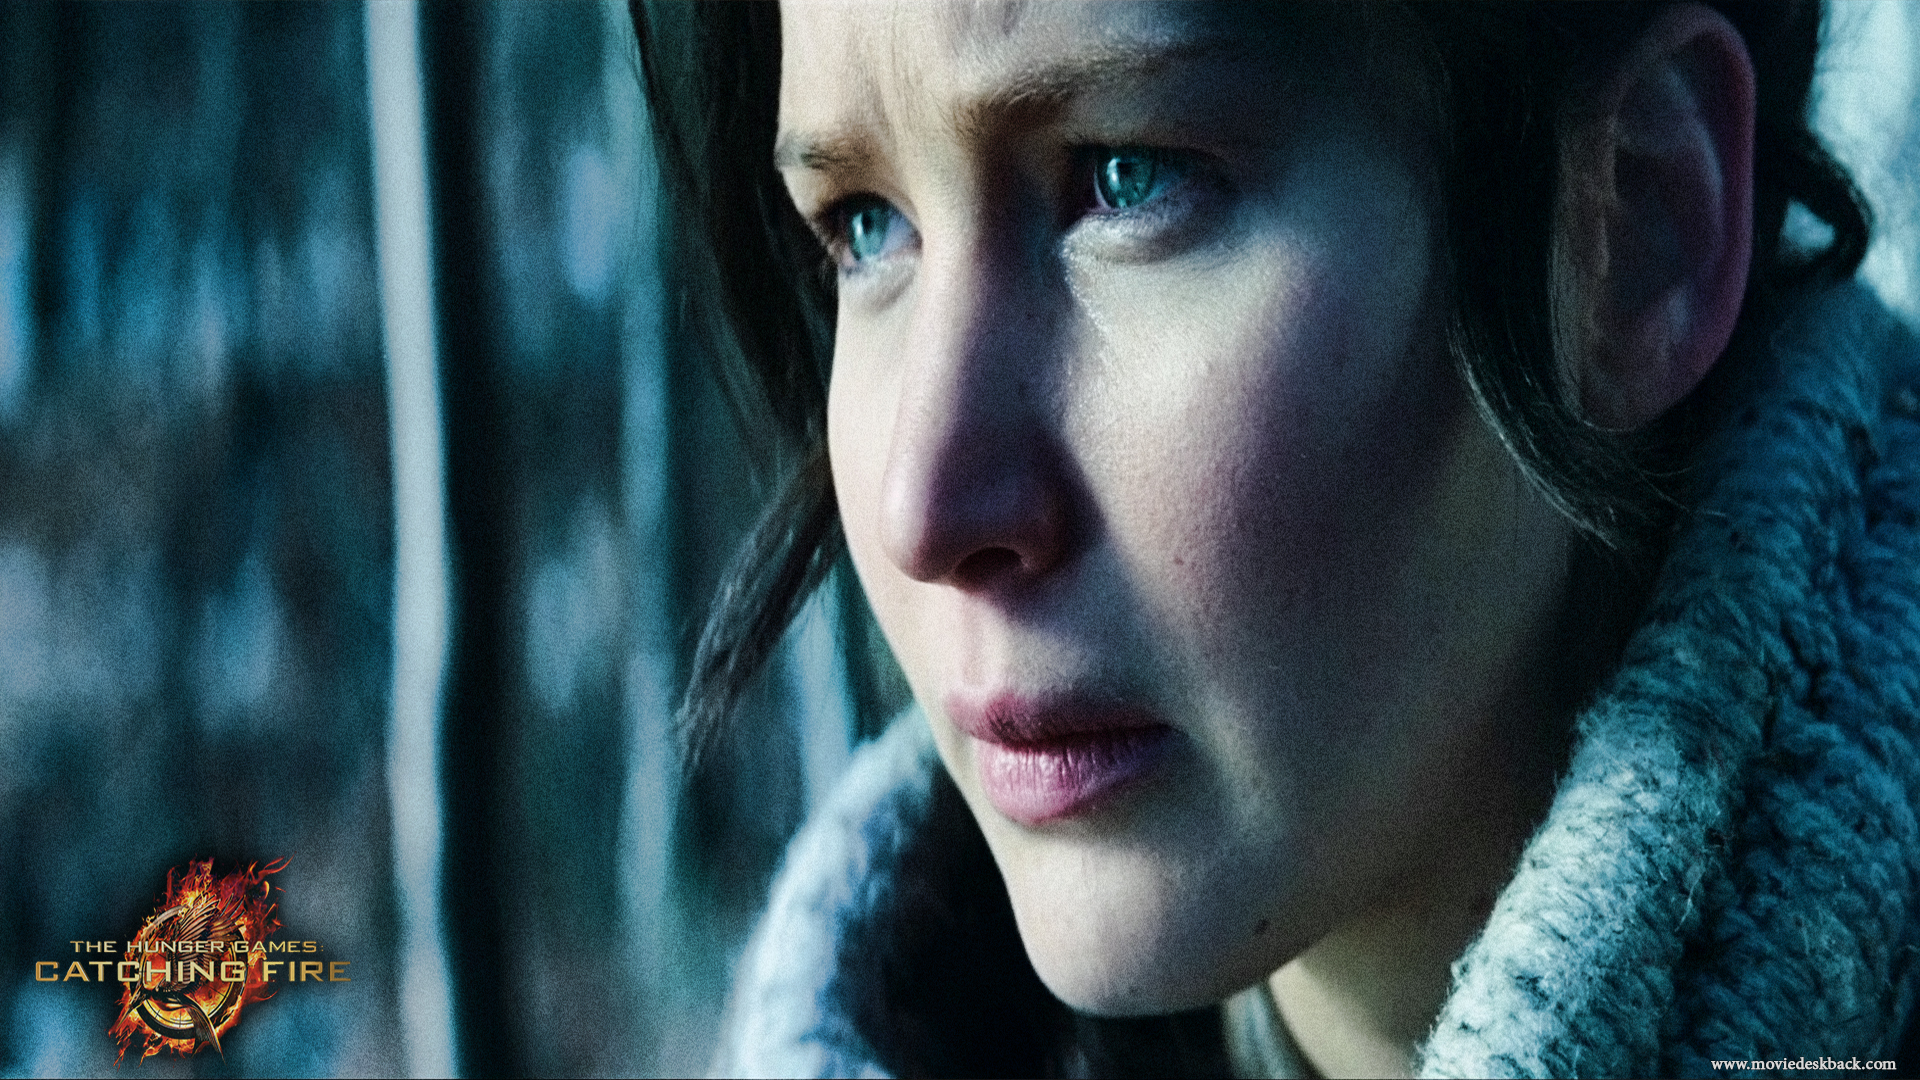 The Hunger Games: Catching Fire Official Theatrical Trailer (2013) HD 